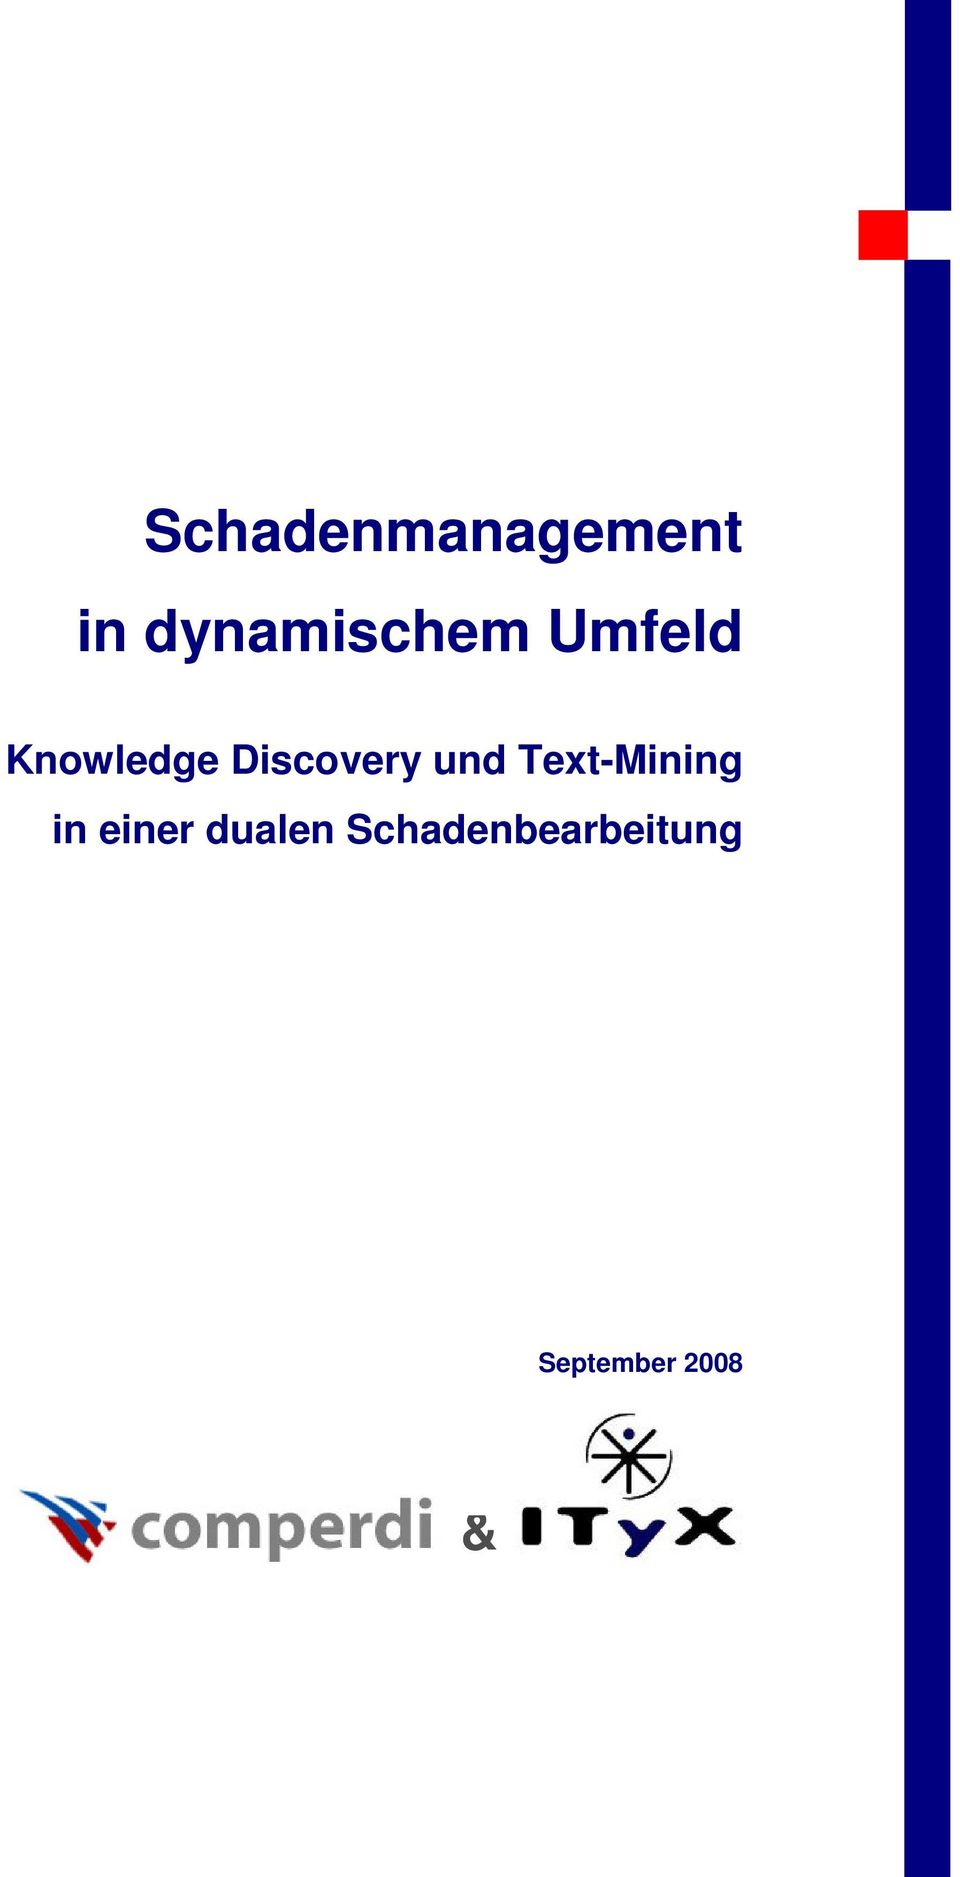 Discovery und Text-Mining in